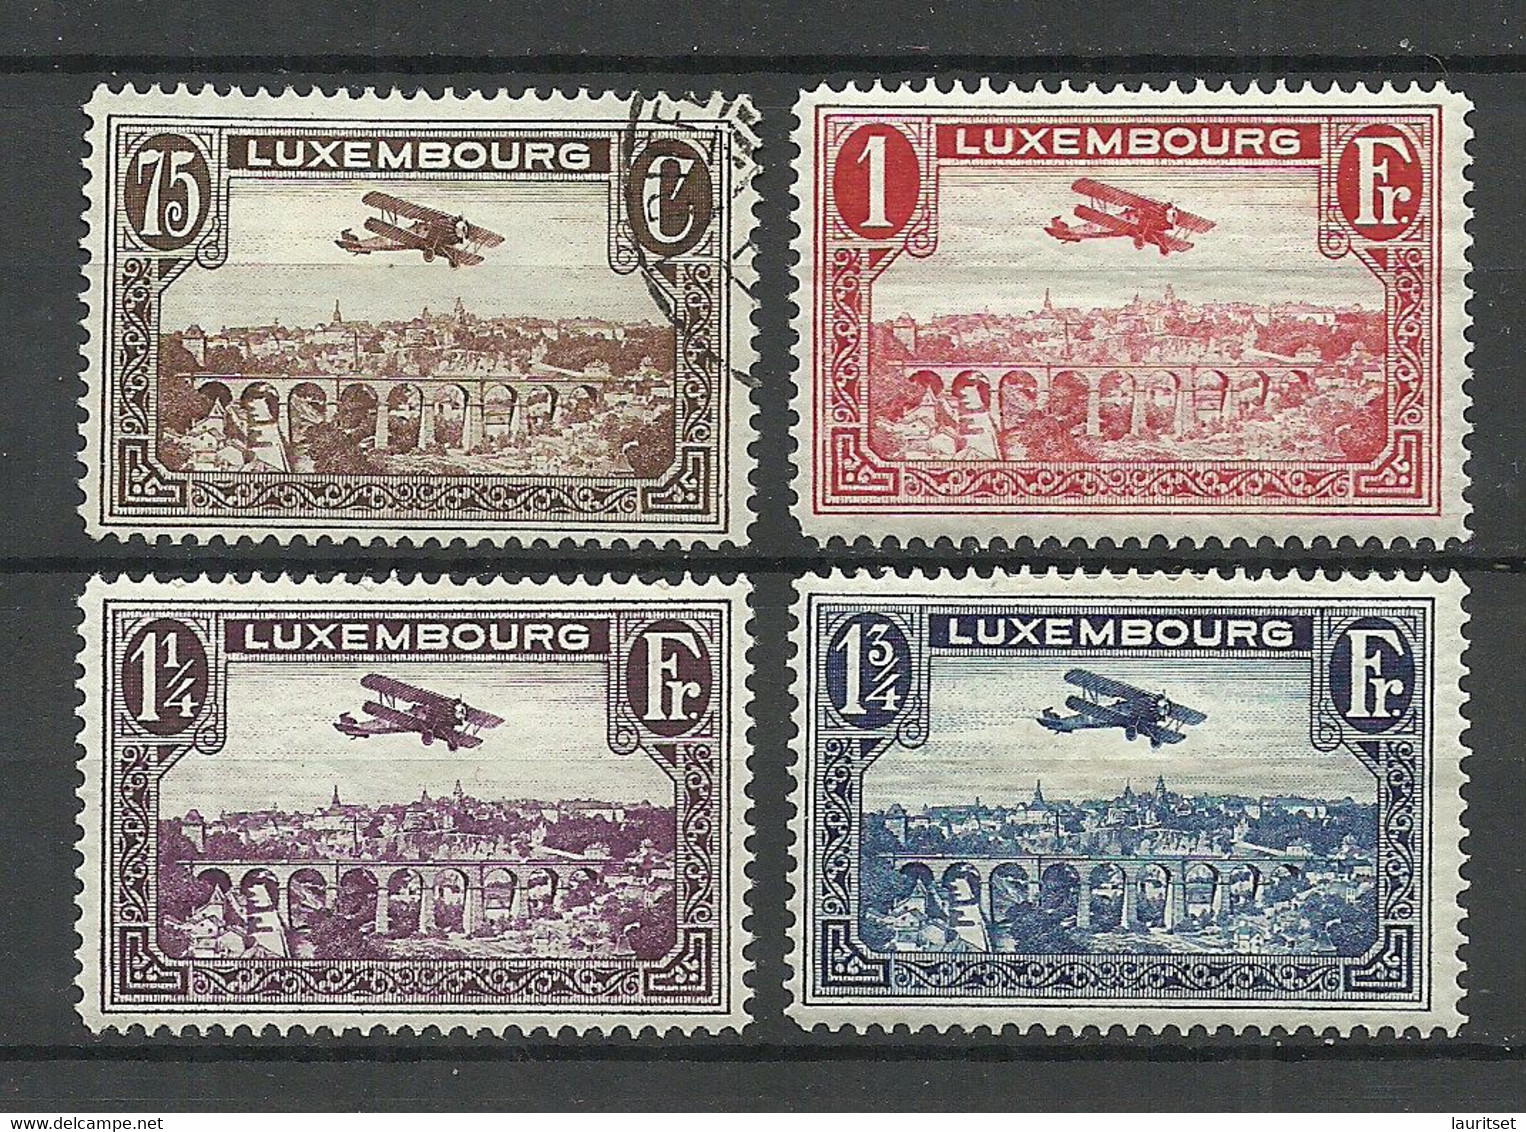 LUXEMBOURG Luxemburg 1931 Michel 234 - 237 */o Flugpost Air Mail Air Plane Doppeldecker - Used Stamps